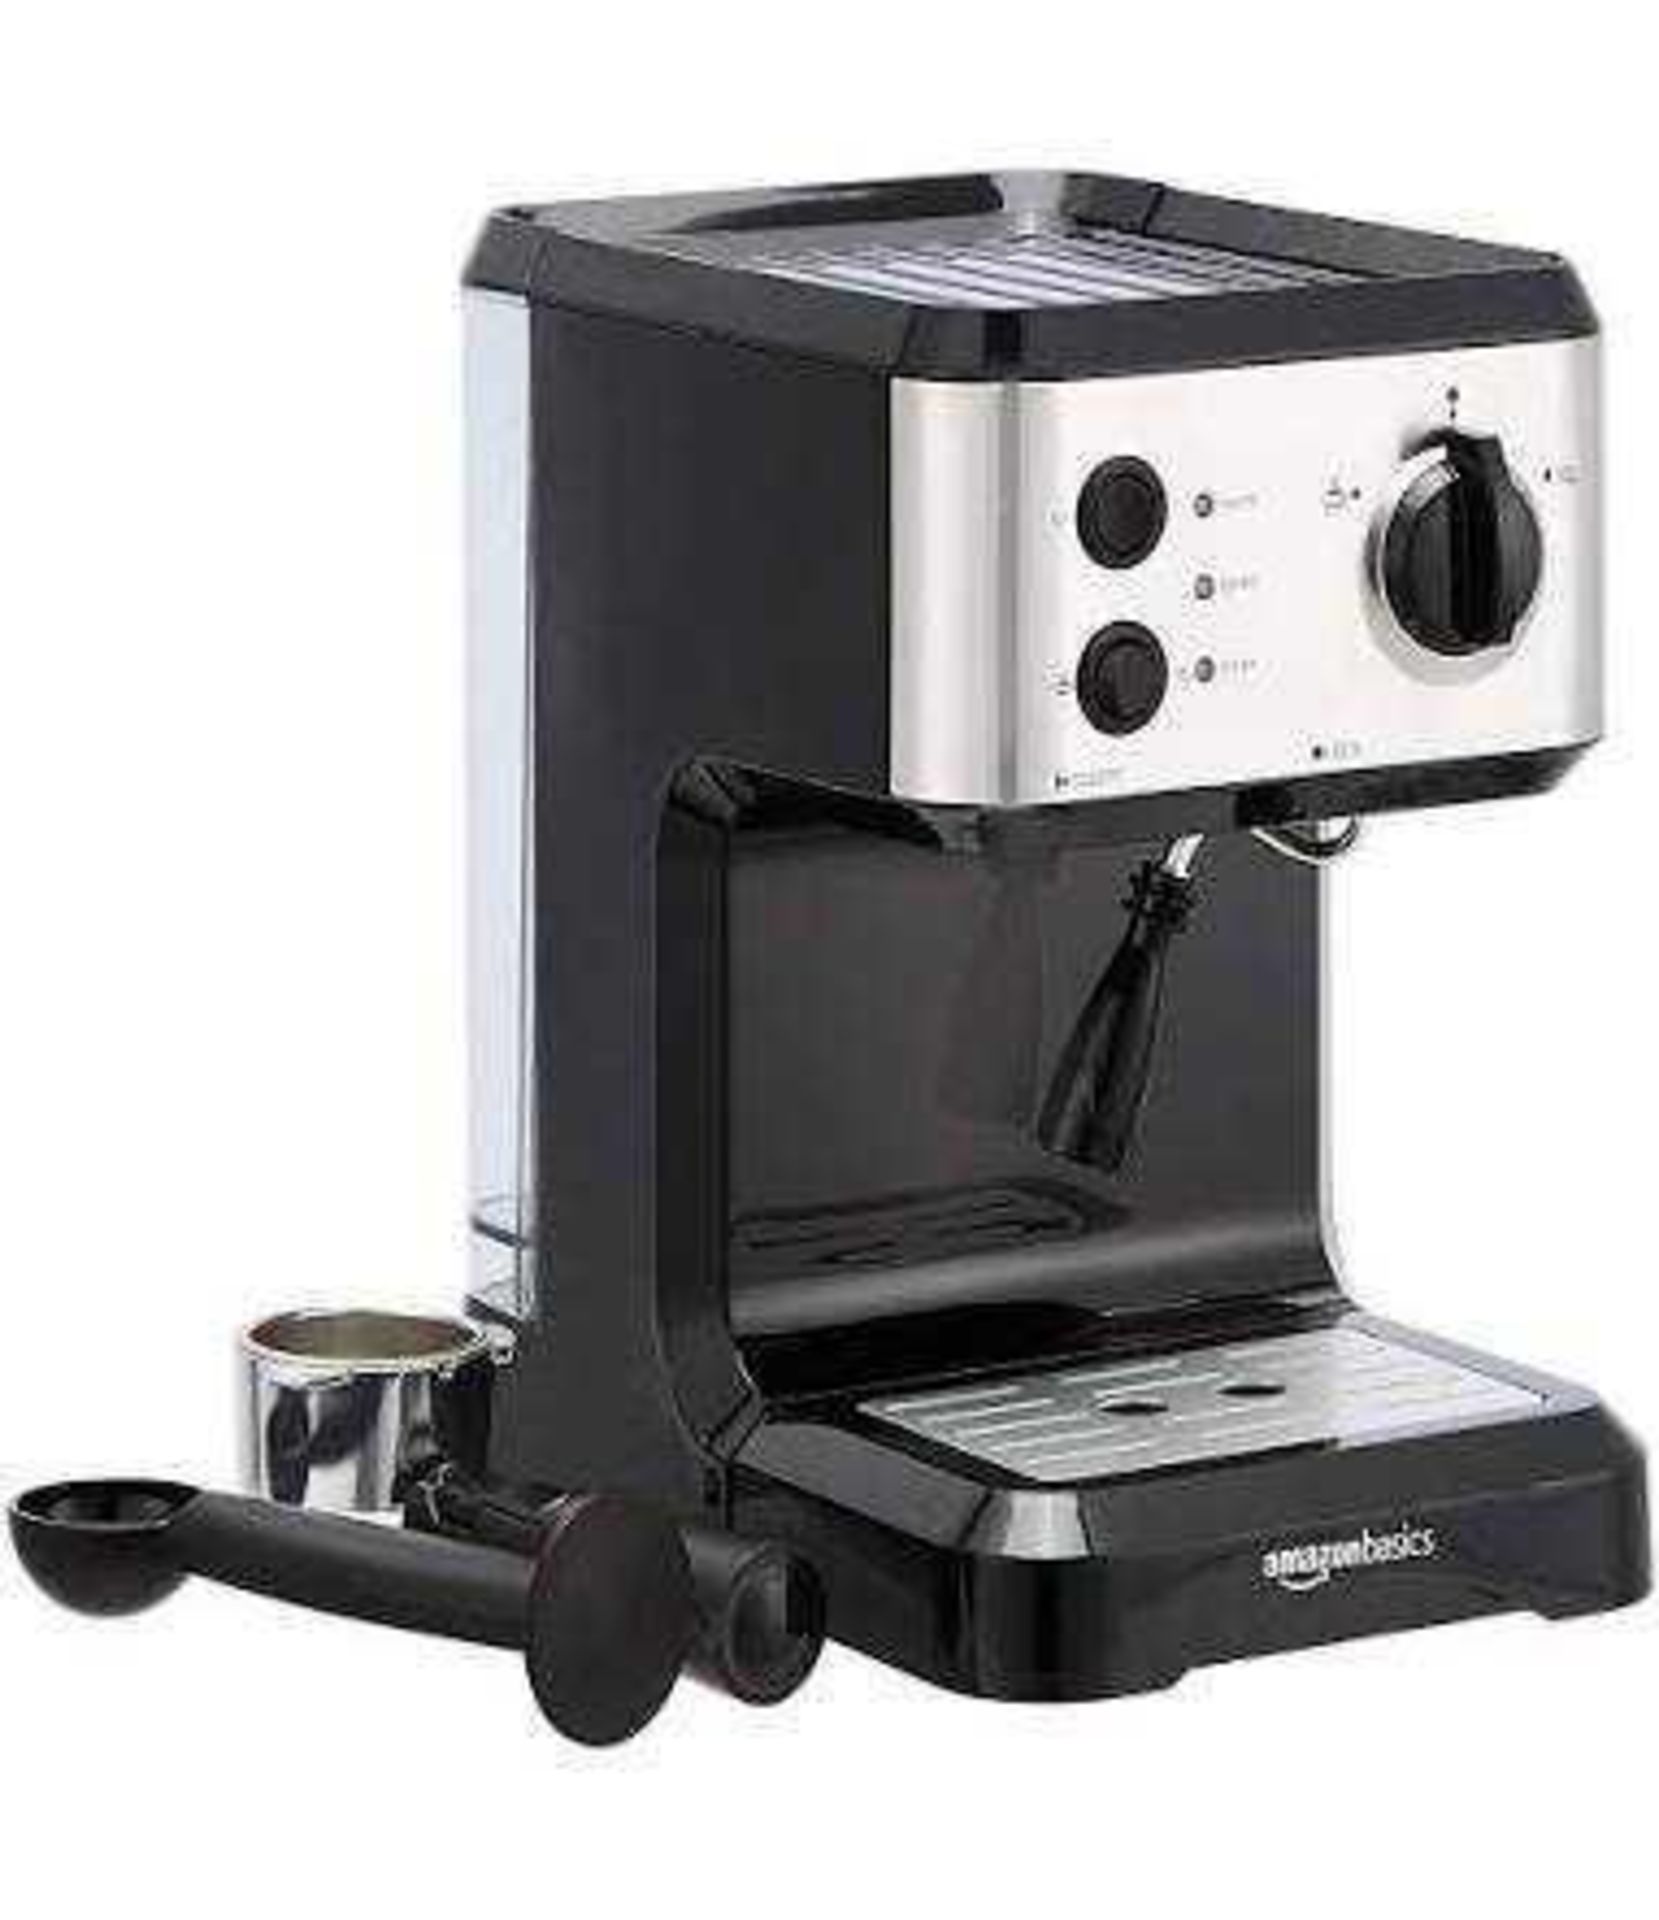 RRP £200 Lot To Contain 2 Boxed Brand New Amazon Basics Espresso Coffee Machines With Milk Frothers